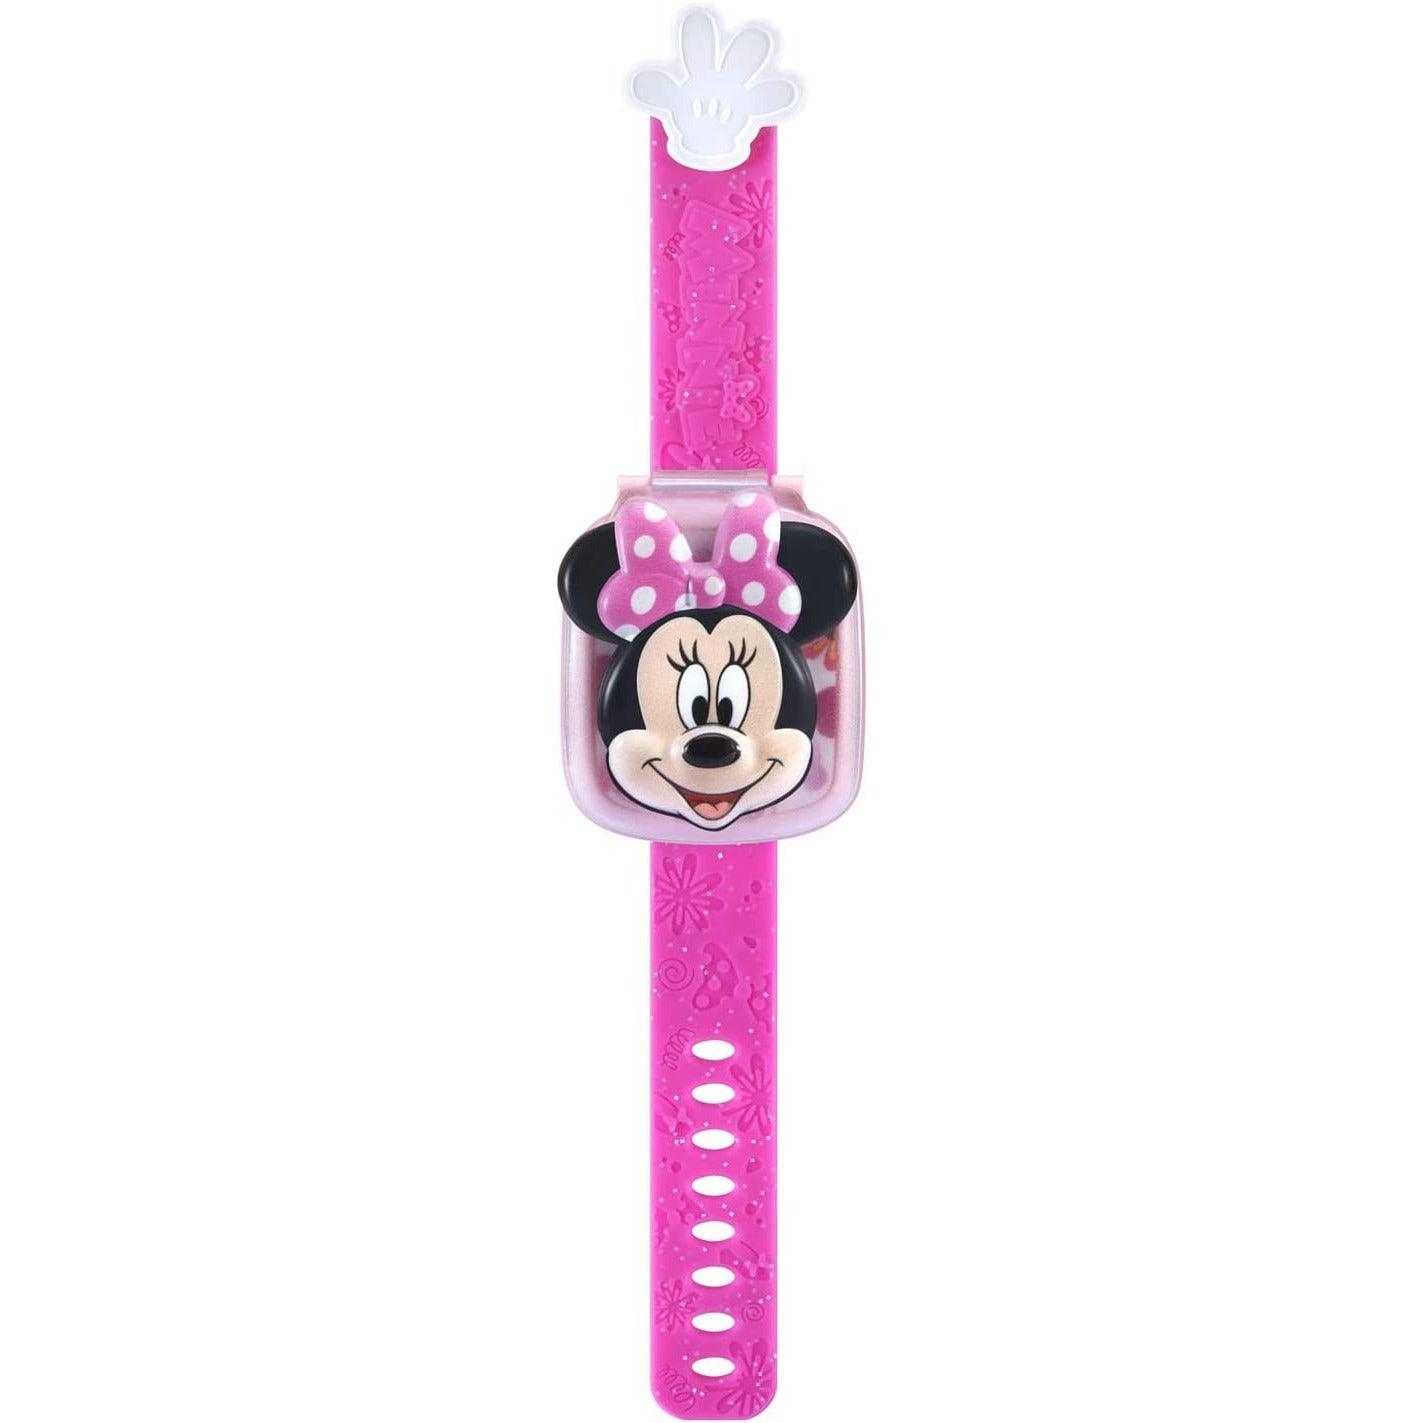 VTech Disney Junior Minnie - Minnie Mouse Learning Watch - BumbleToys - 5-7 Years, Kids, minne, Pre-Order, Watch